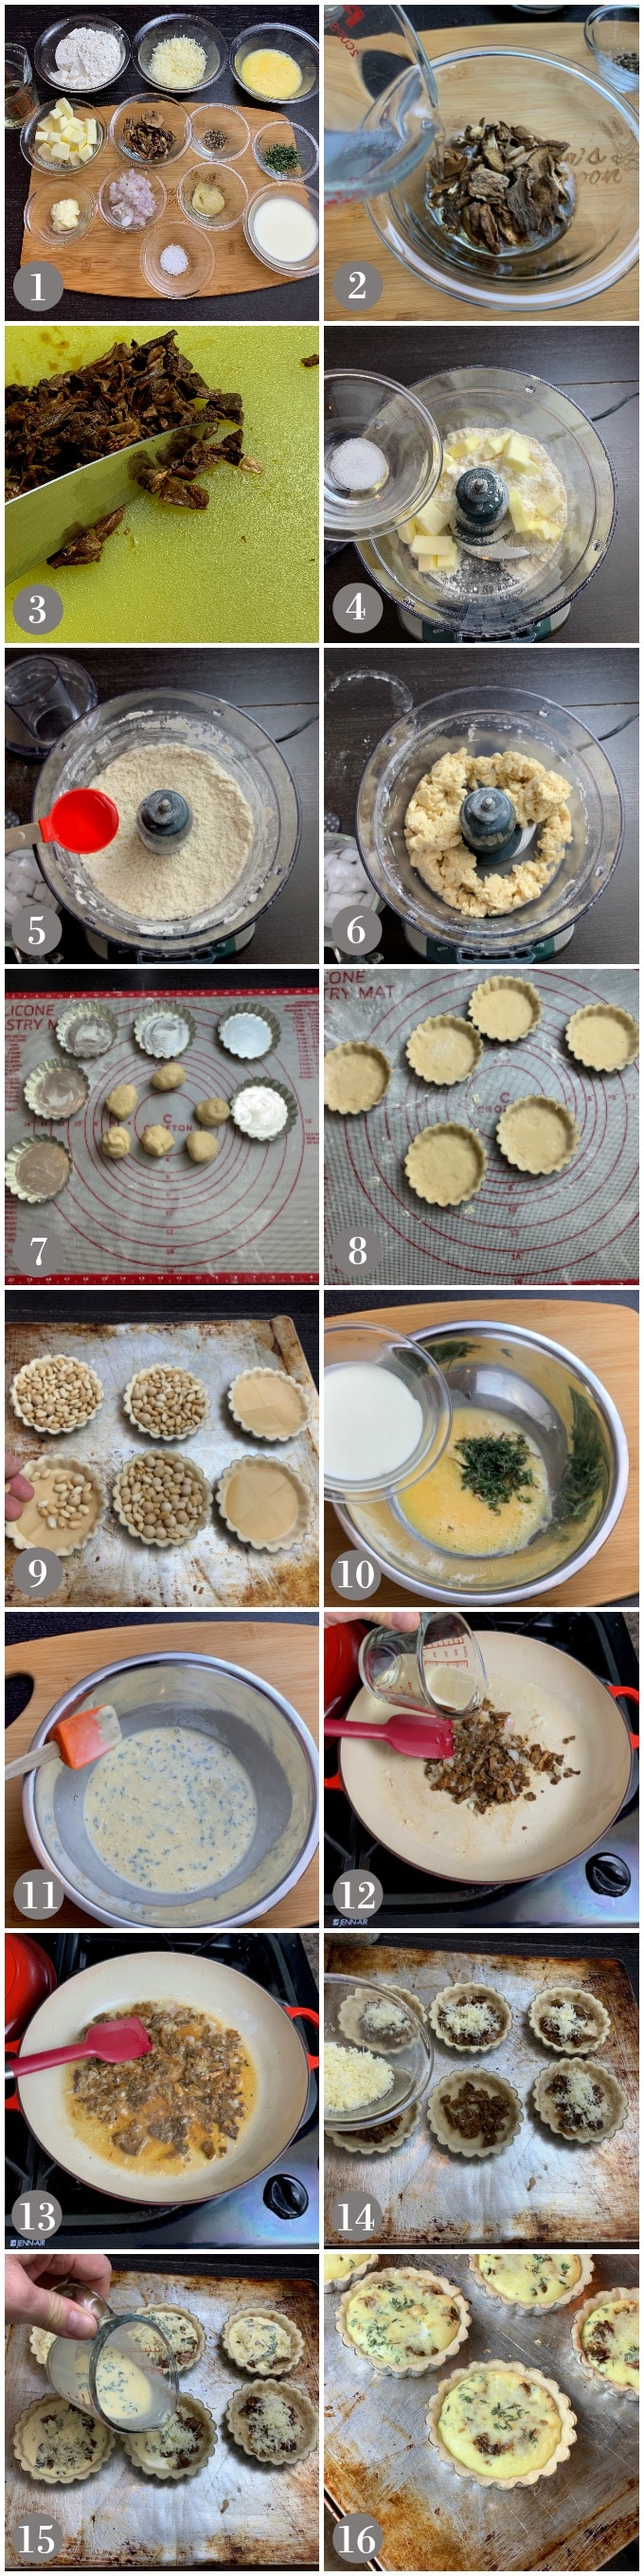 A collage of photos showing steps to make the dough, filling and bake wild mushroom and gruyere mini quiches.